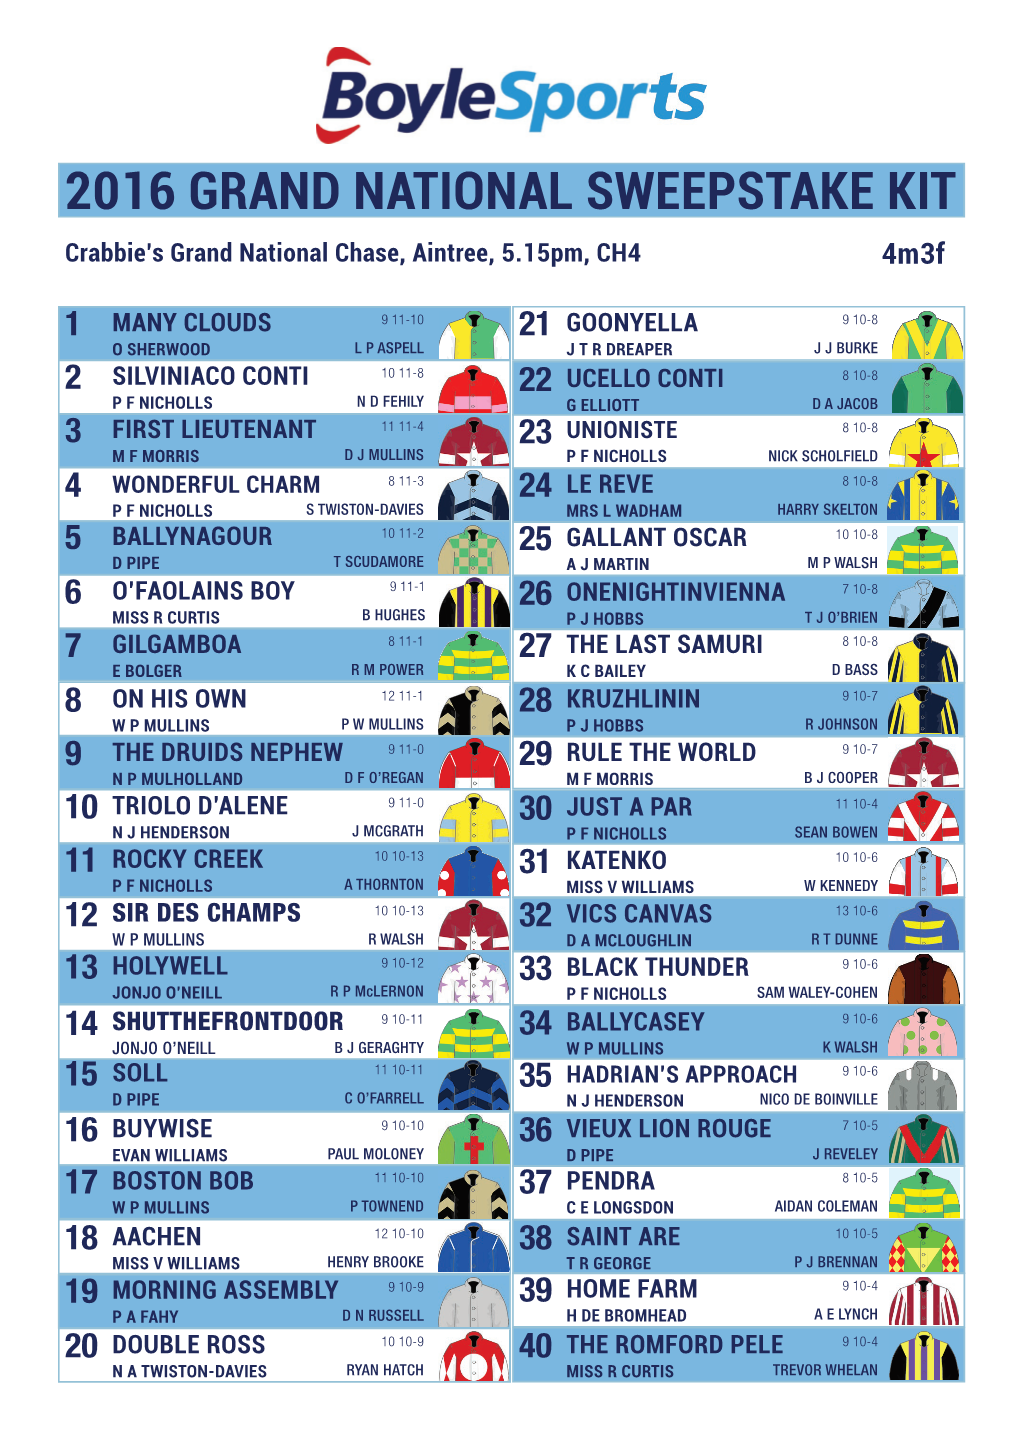 2016 GRAND NATIONAL SWEEPSTAKE KIT Crabbie’S Grand National Chase, Aintree, 5.15Pm, CH4 4M3f